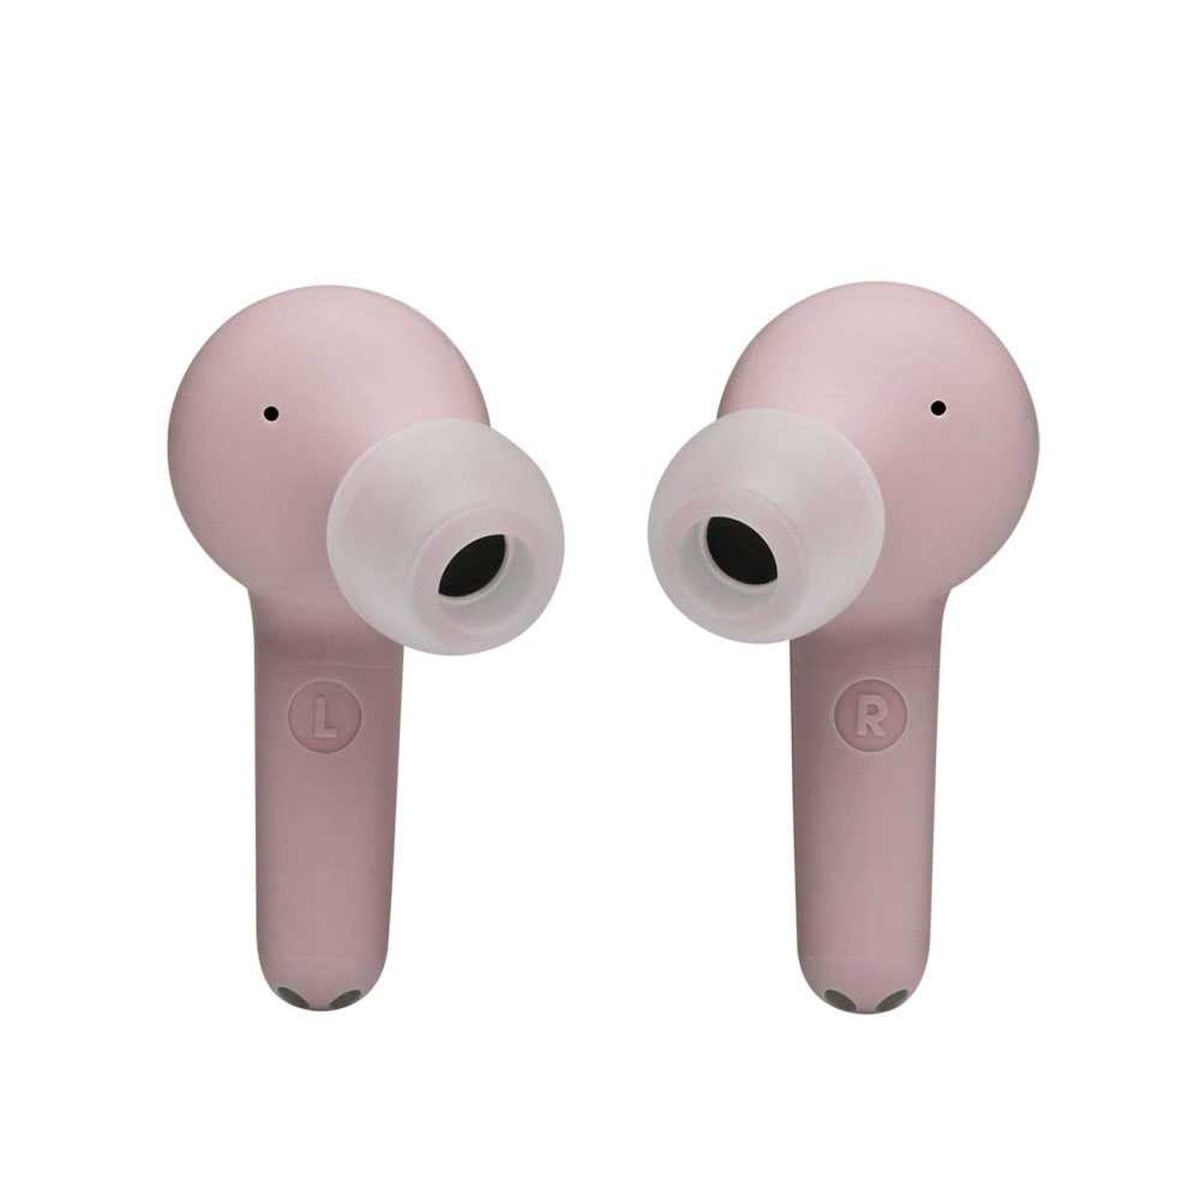 2102171242175 Smart Crop C0 5 0 5 1500X1500 70 Jbl &Lt;H1 Class=&Quot;Product_Title Entry-Title&Quot;&Gt;Jbl Tune 215 Tws Earbuds - Pink&Lt;/H1&Gt; &Lt;Ul&Gt; &Lt;Li&Gt;Dual Connect Gives You The Freedom To Listen To Music Or Attend To Calls With Either One Or Both Earbuds&Lt;/Li&Gt; &Lt;Li&Gt;Offers Up To 5 Hours Of Battery Life And Up To 20 Hours More When Using The Charging Case&Lt;/Li&Gt; &Lt;Li&Gt;Quickly Recharge Via The Usb-C Interface&Lt;/Li&Gt; &Lt;Li&Gt;Charging Case Features A River Stone-Inspired Design, With A Soft Body And A Curved Lid That Pops Out To Give You Quick Access To The Buds&Lt;/Li&Gt; &Lt;/Ul&Gt; Jbl Earphones Jbl Tune 215 Tws Earbuds - Pink